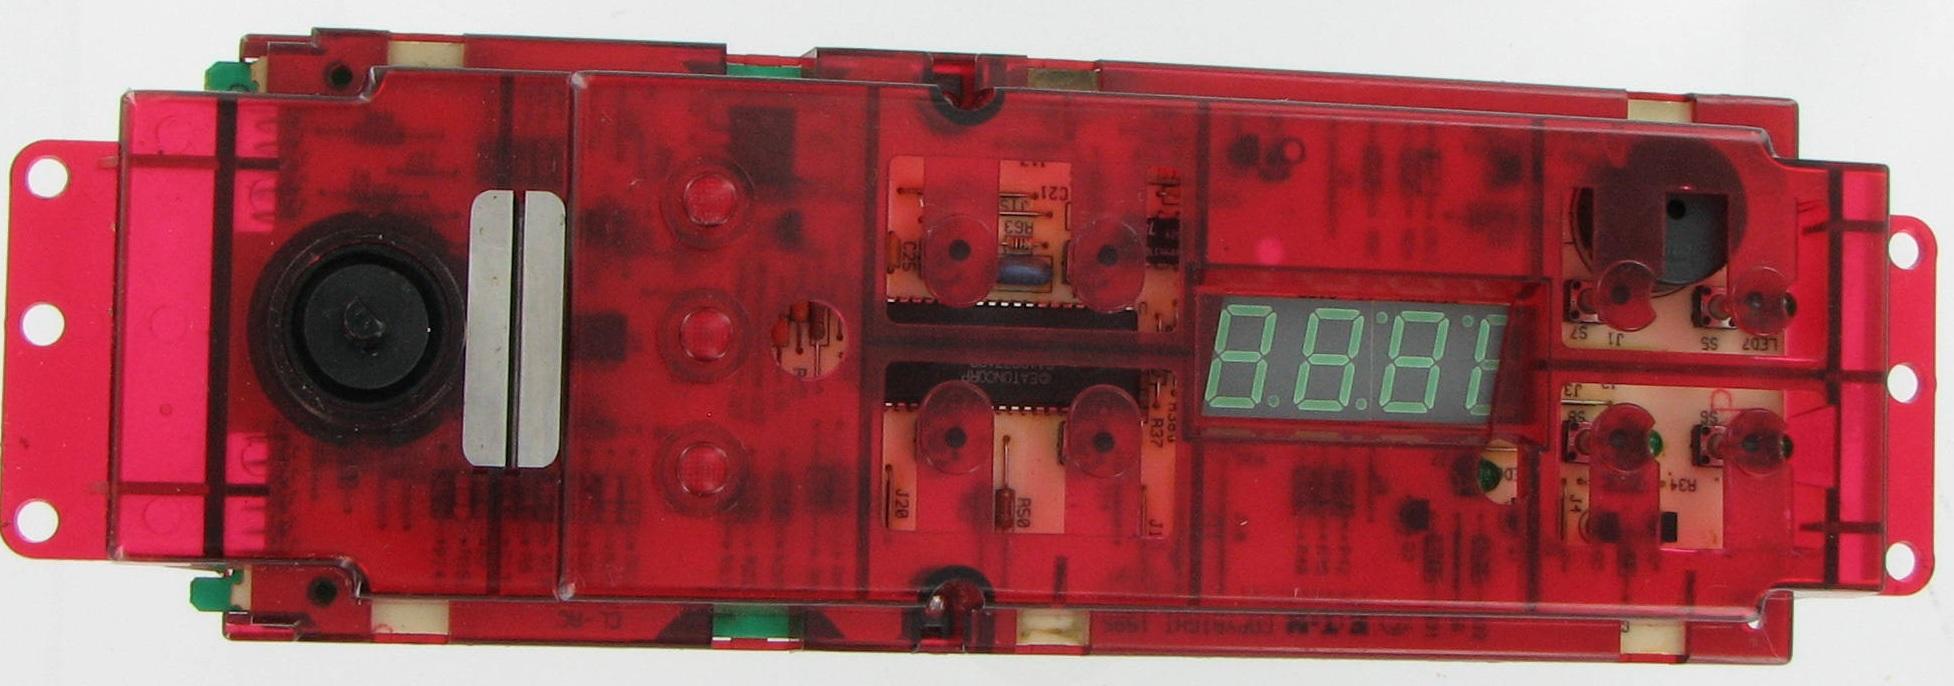 Range Control Board WB27K5251 Repair Service For GE Oven 